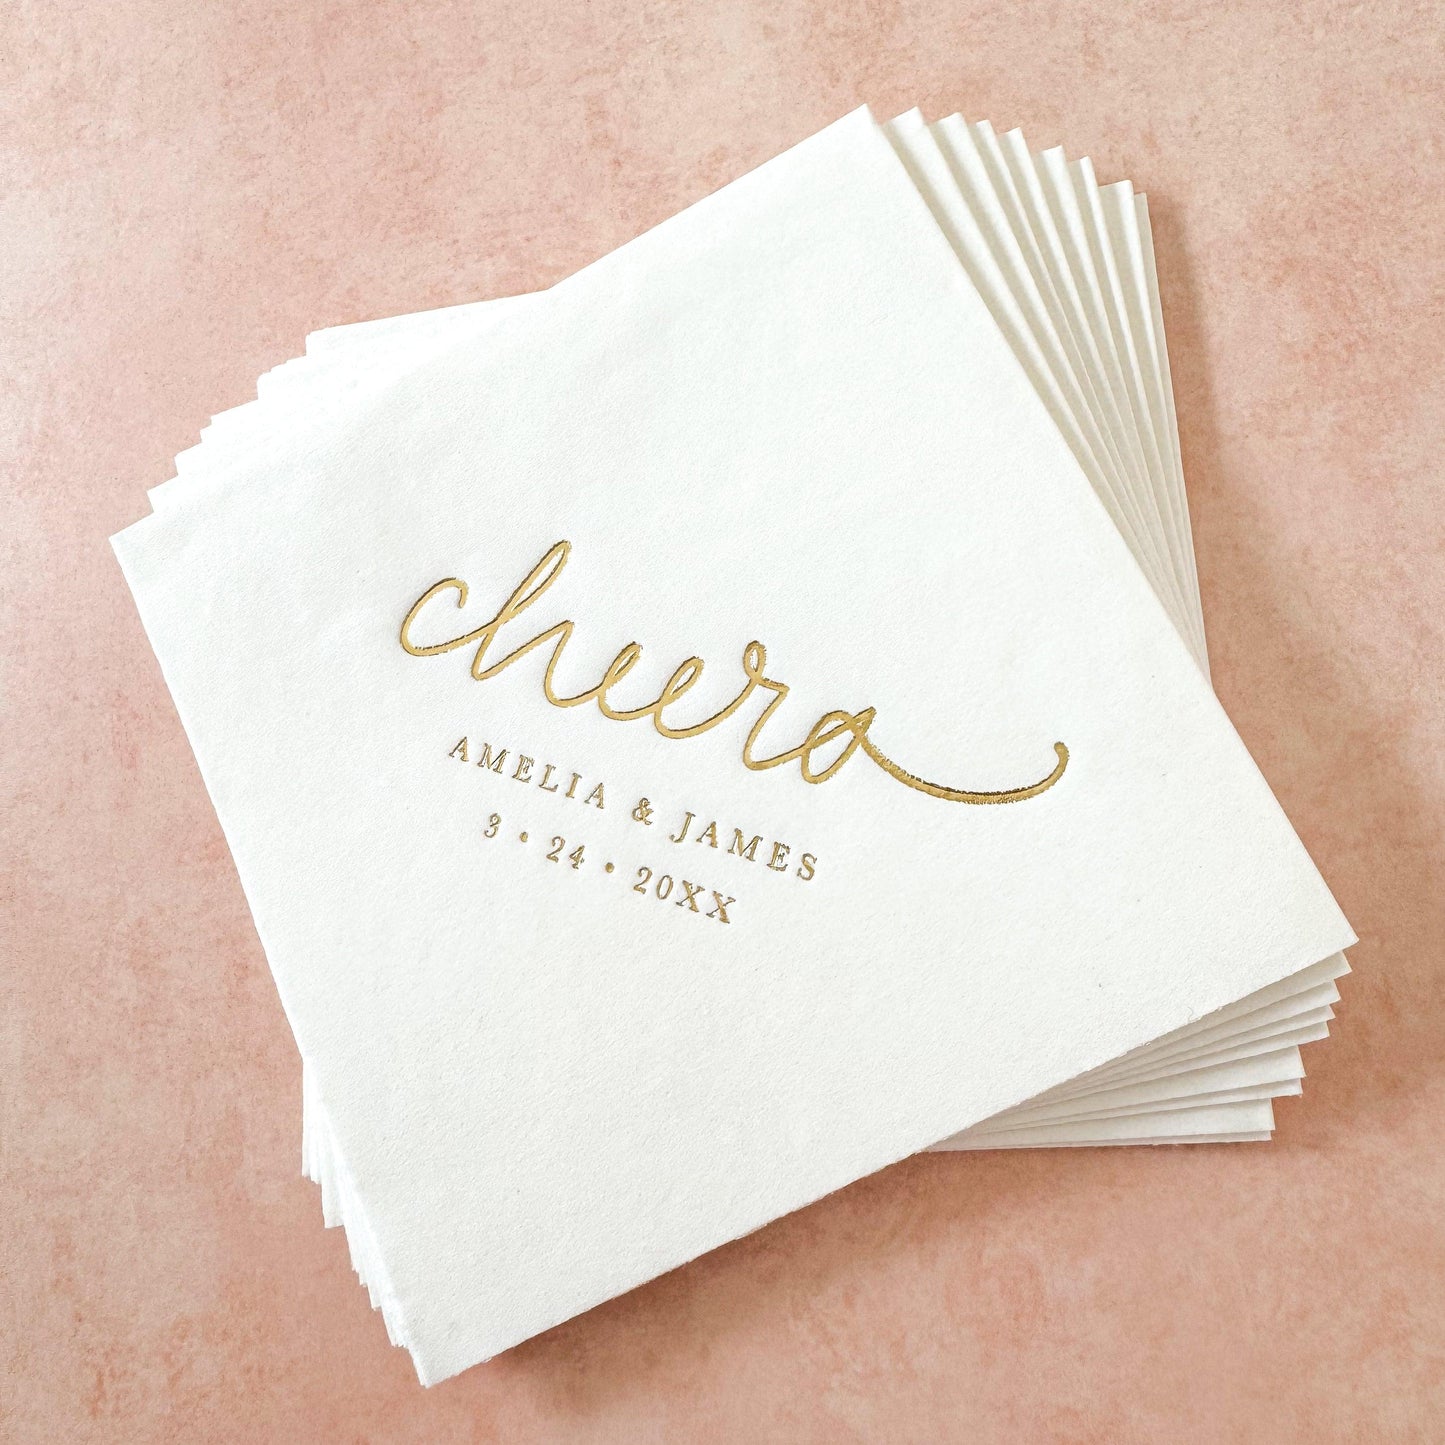 Cheers Personalized Cocktail Napkins - Plum Grove Design